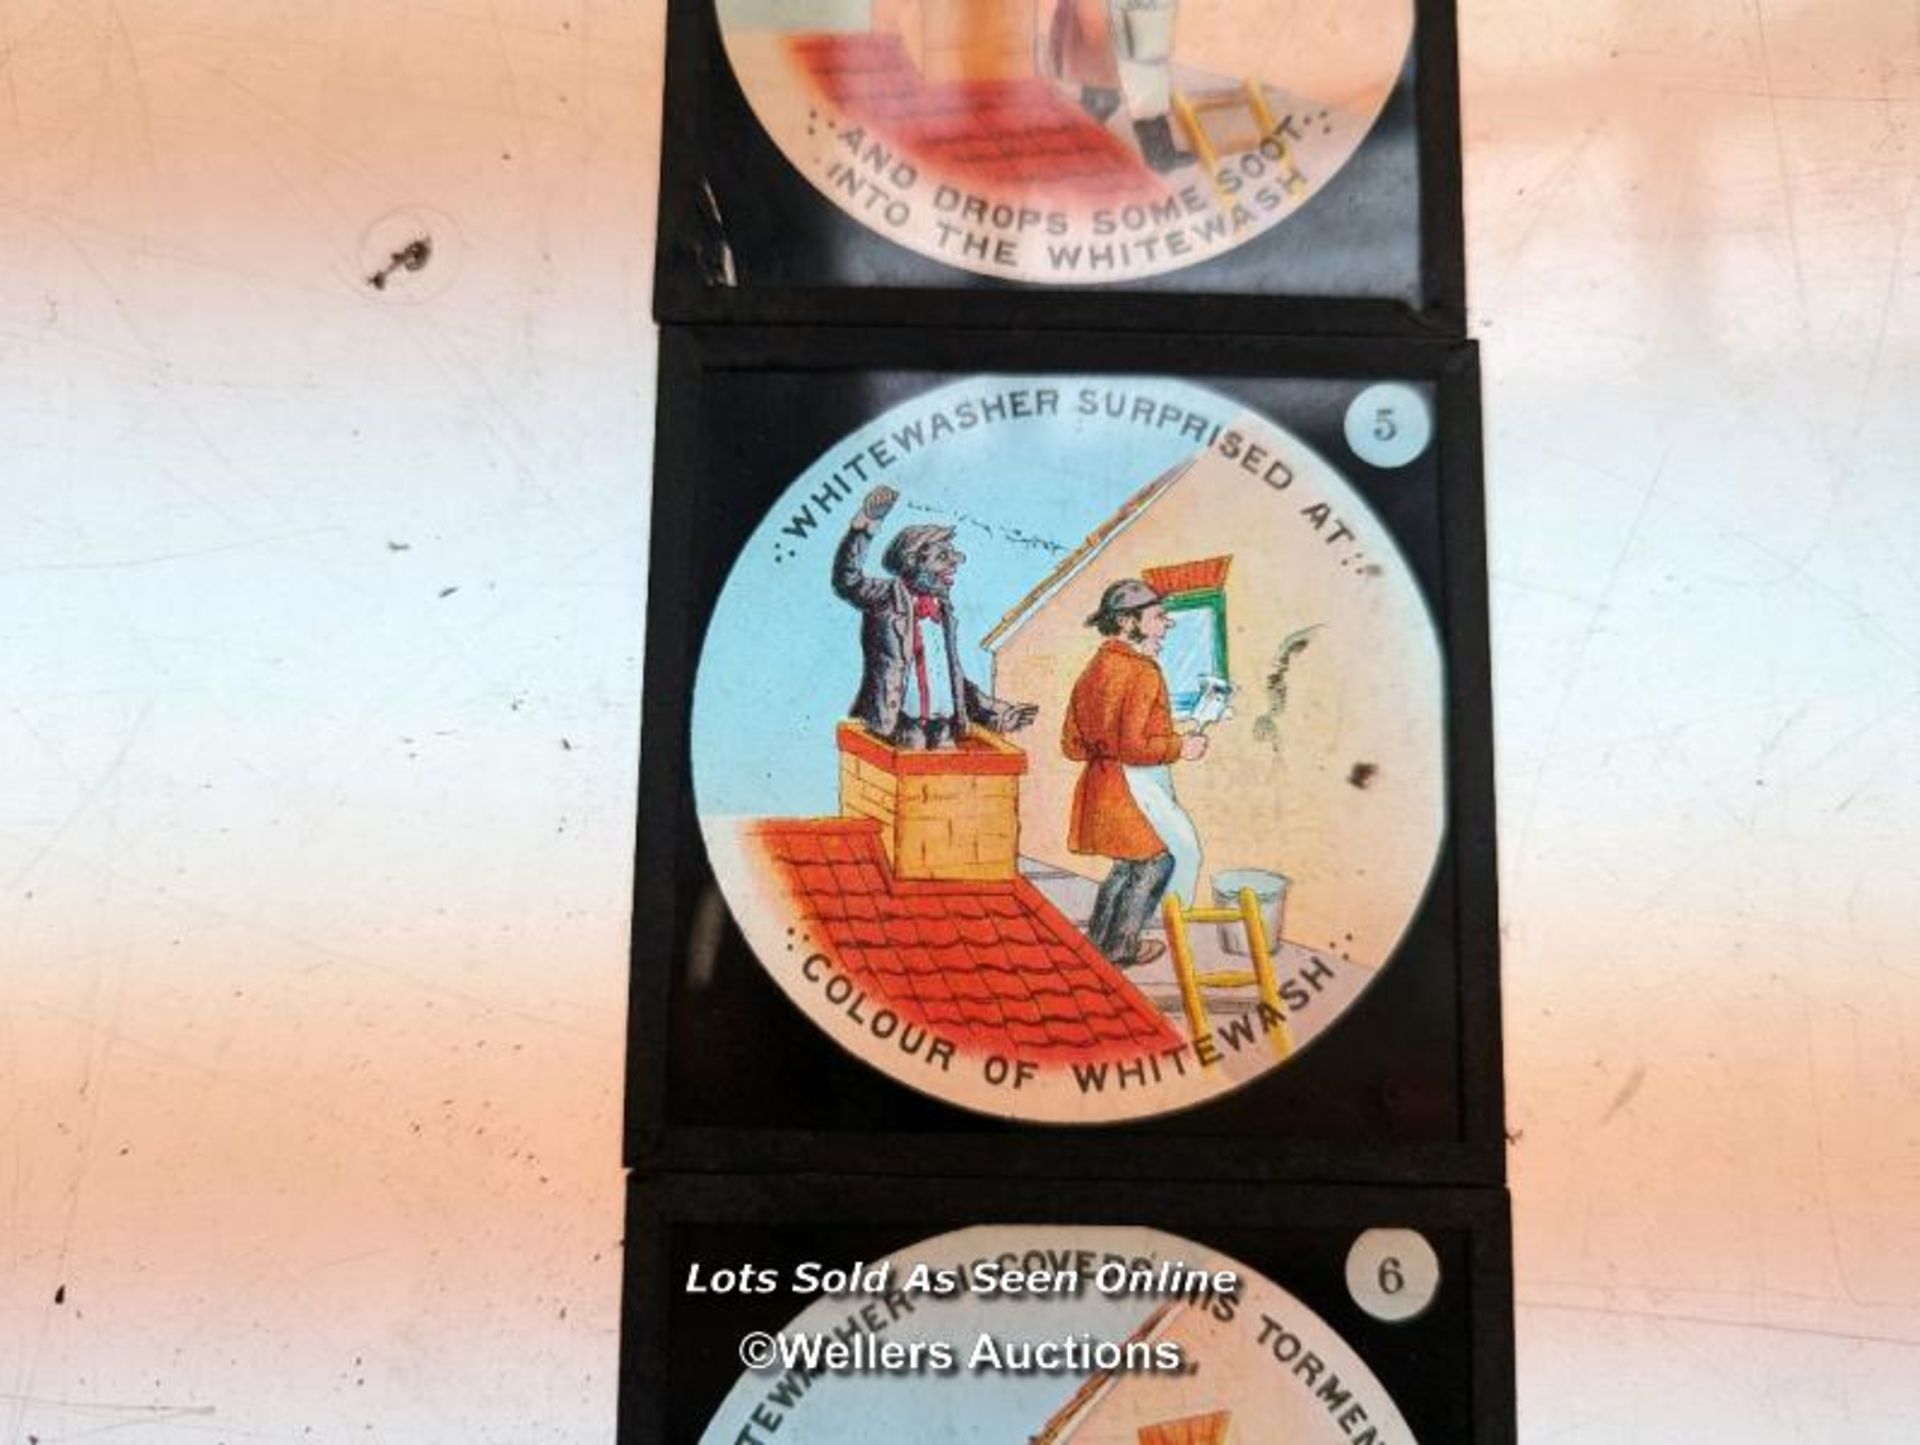 Set of 6 magic lantern slides 'the sweep and whitewasher' some missing from full set. 8.3cm x 8.3cm - Image 2 of 4